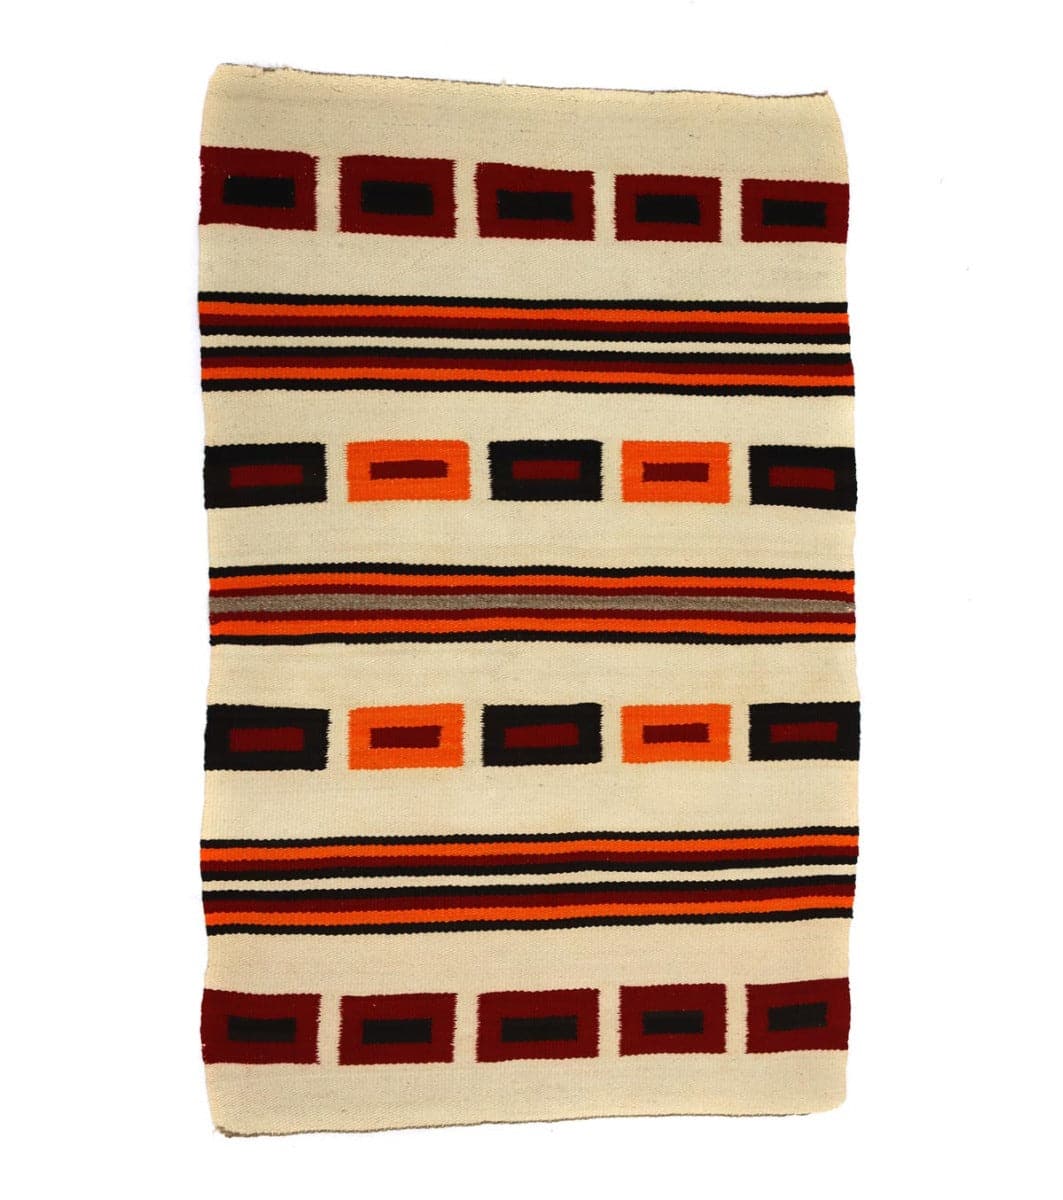 Navajo Banded Blanket c. 1900s, 58.5" x 36.5" (T90404A-1221-005)
